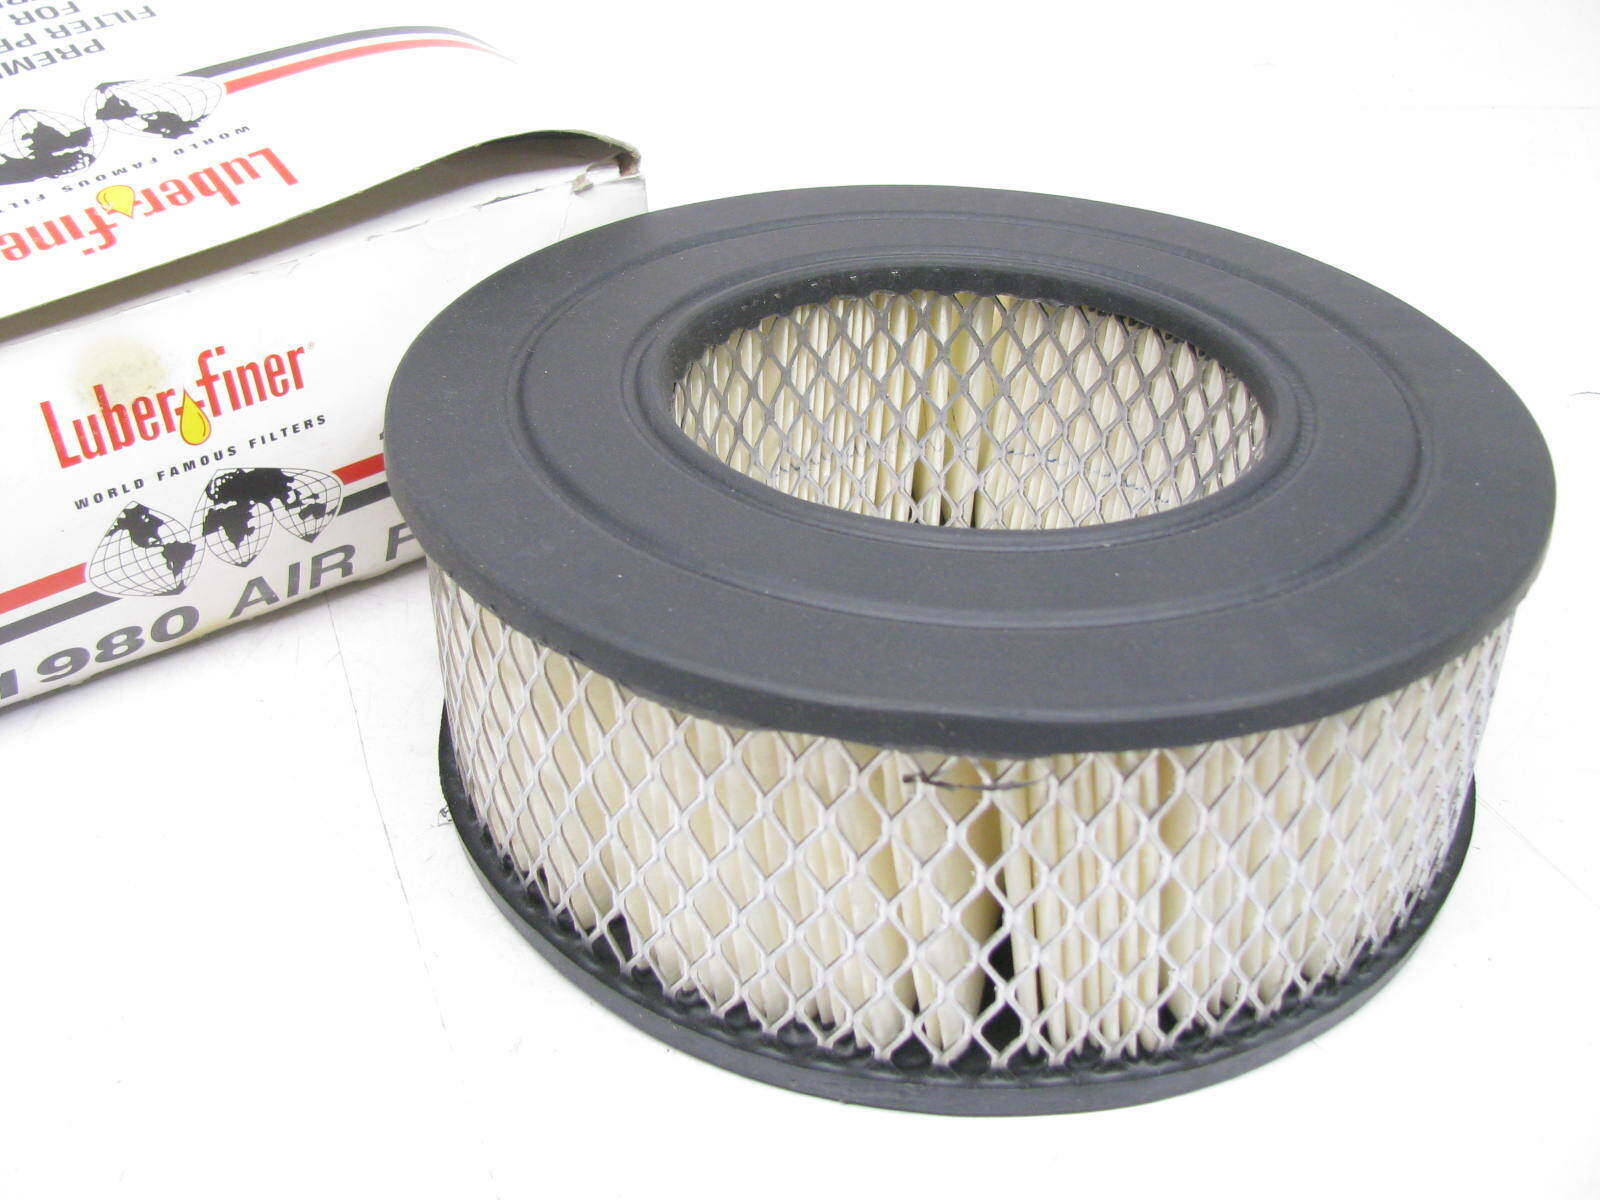 Luberfiner LAF1980 Air Filter Replaces A602C PA1889 LA395 LAF1980 46210